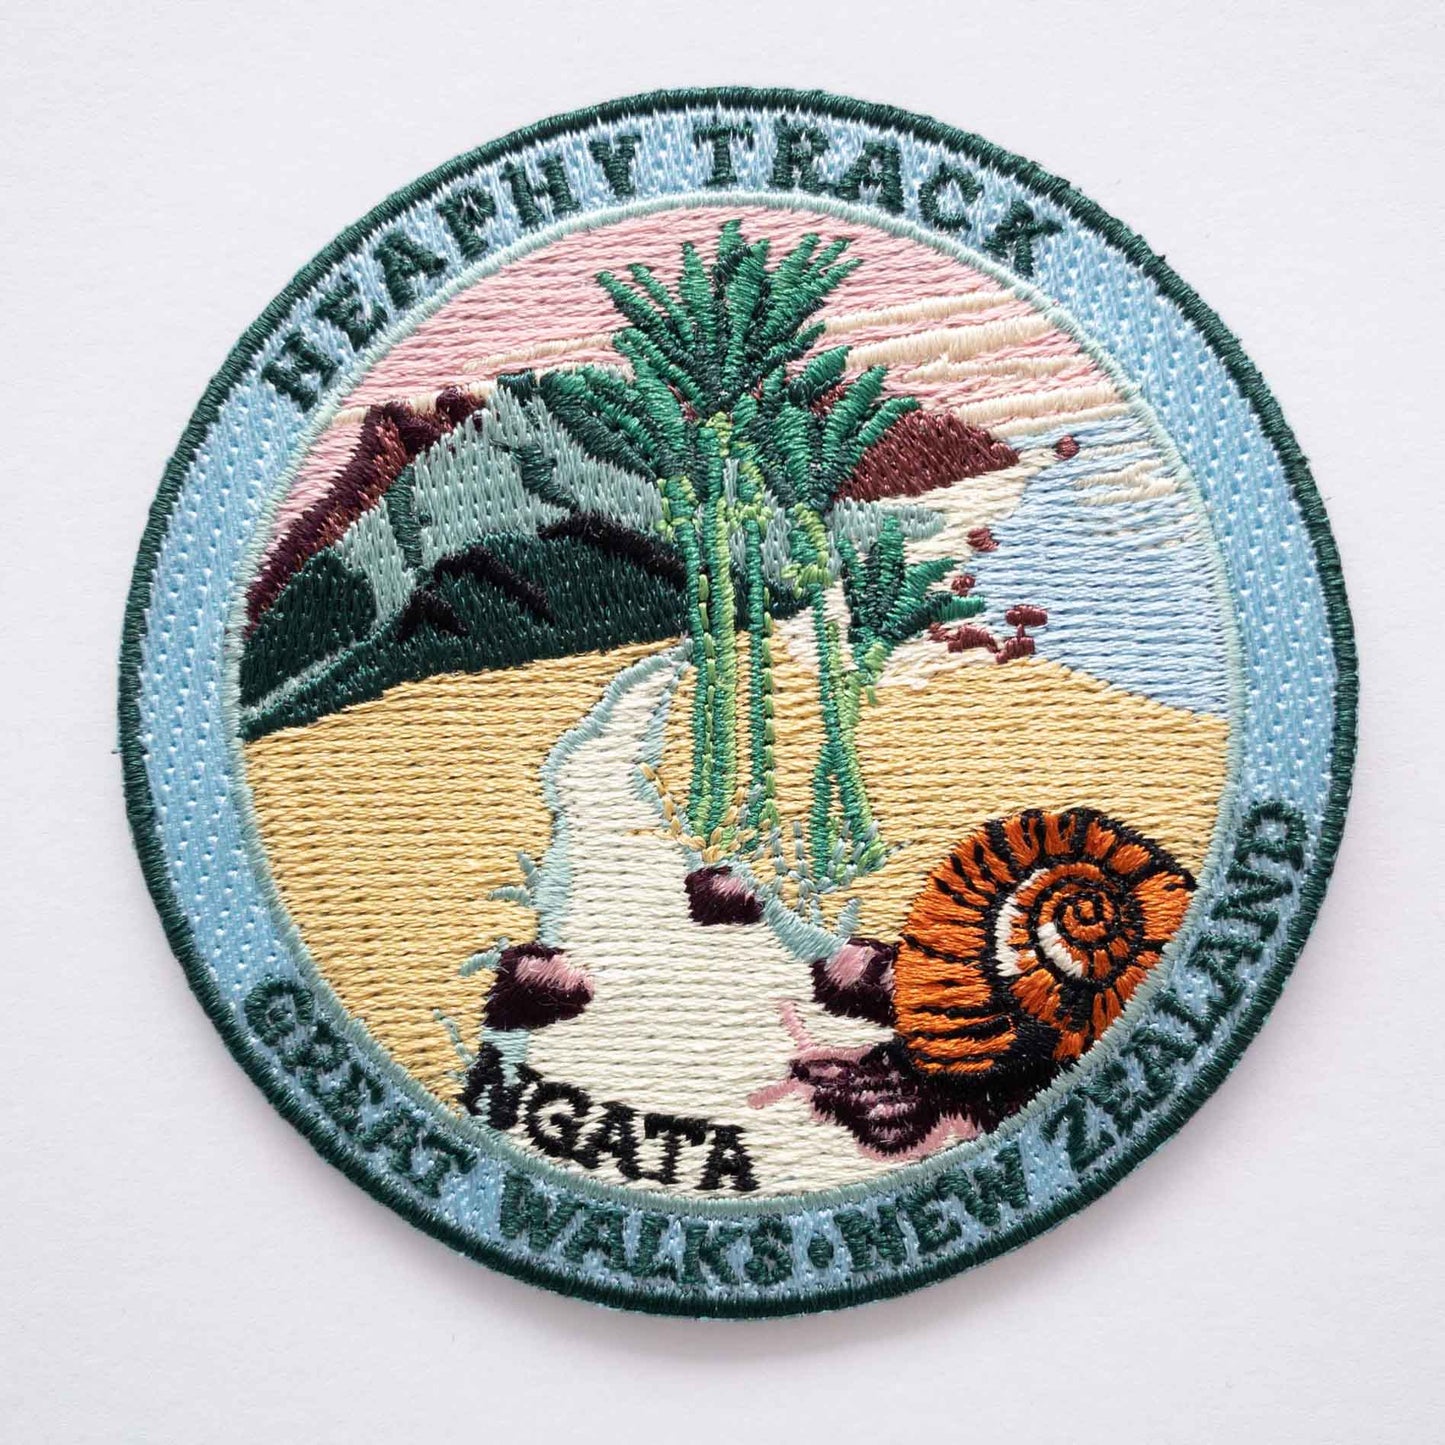 Round, embroidered Heaphy Track patch, with a snail, nikau palms, green hills and pink sky.